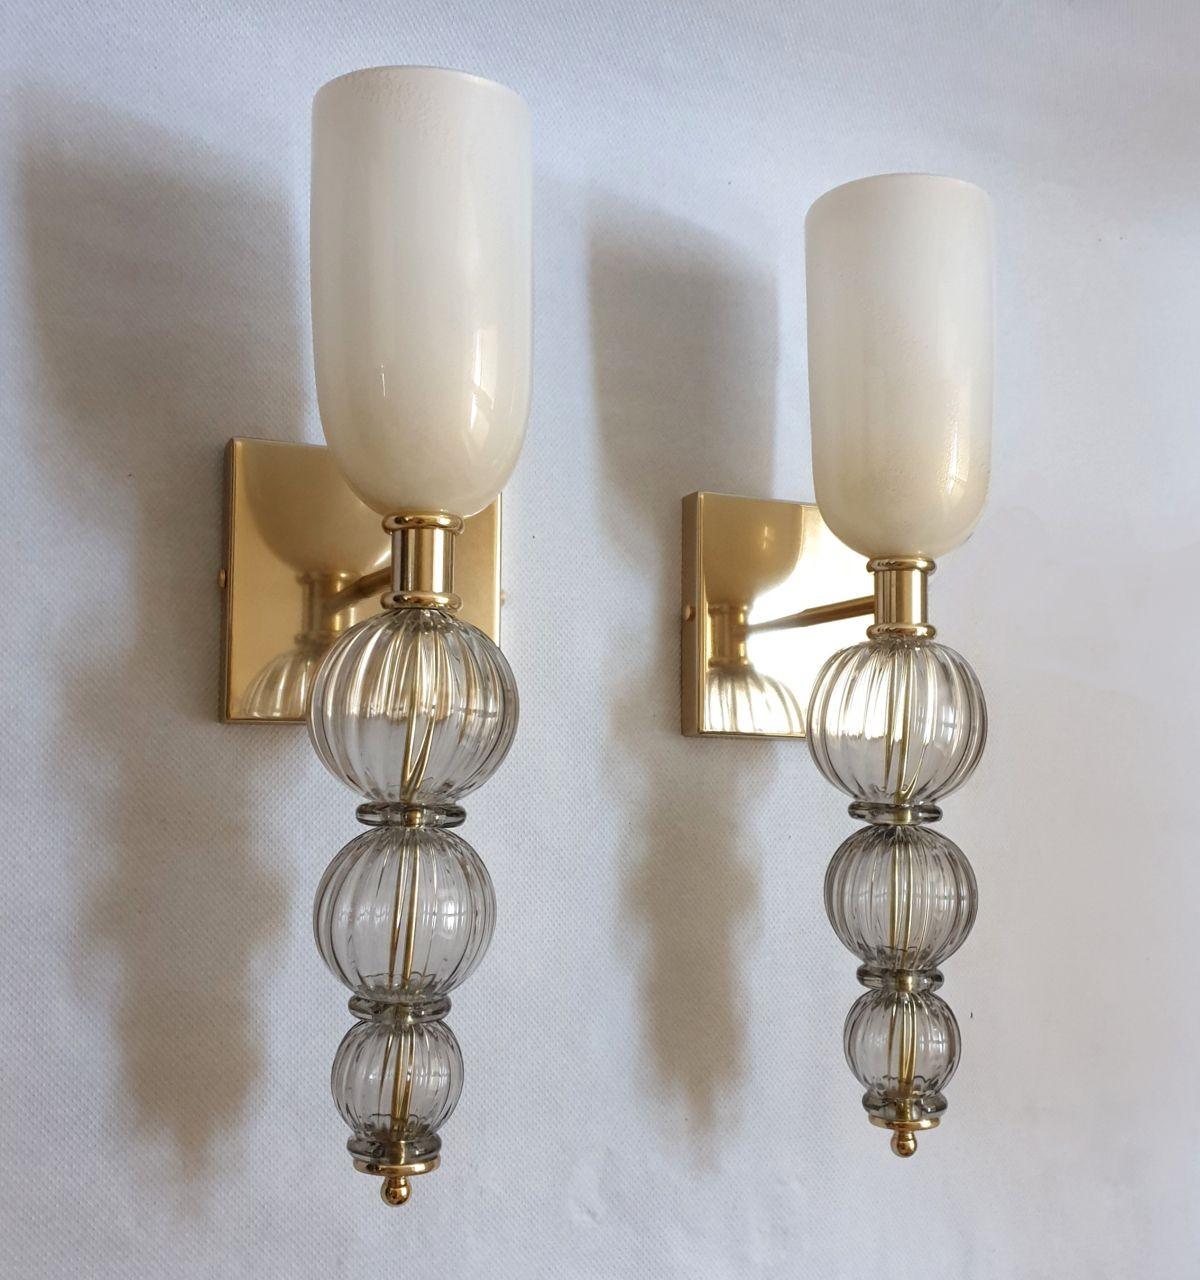 Pair of Mid-Century Modern handblown Murano glass wall sconces, attributed to Venini, Italy 1970s.
The neoclassical sconces have a torchiere shape. 
They are made of a white top vase, nesting the light, with real 24 carrats gold decor;
And three